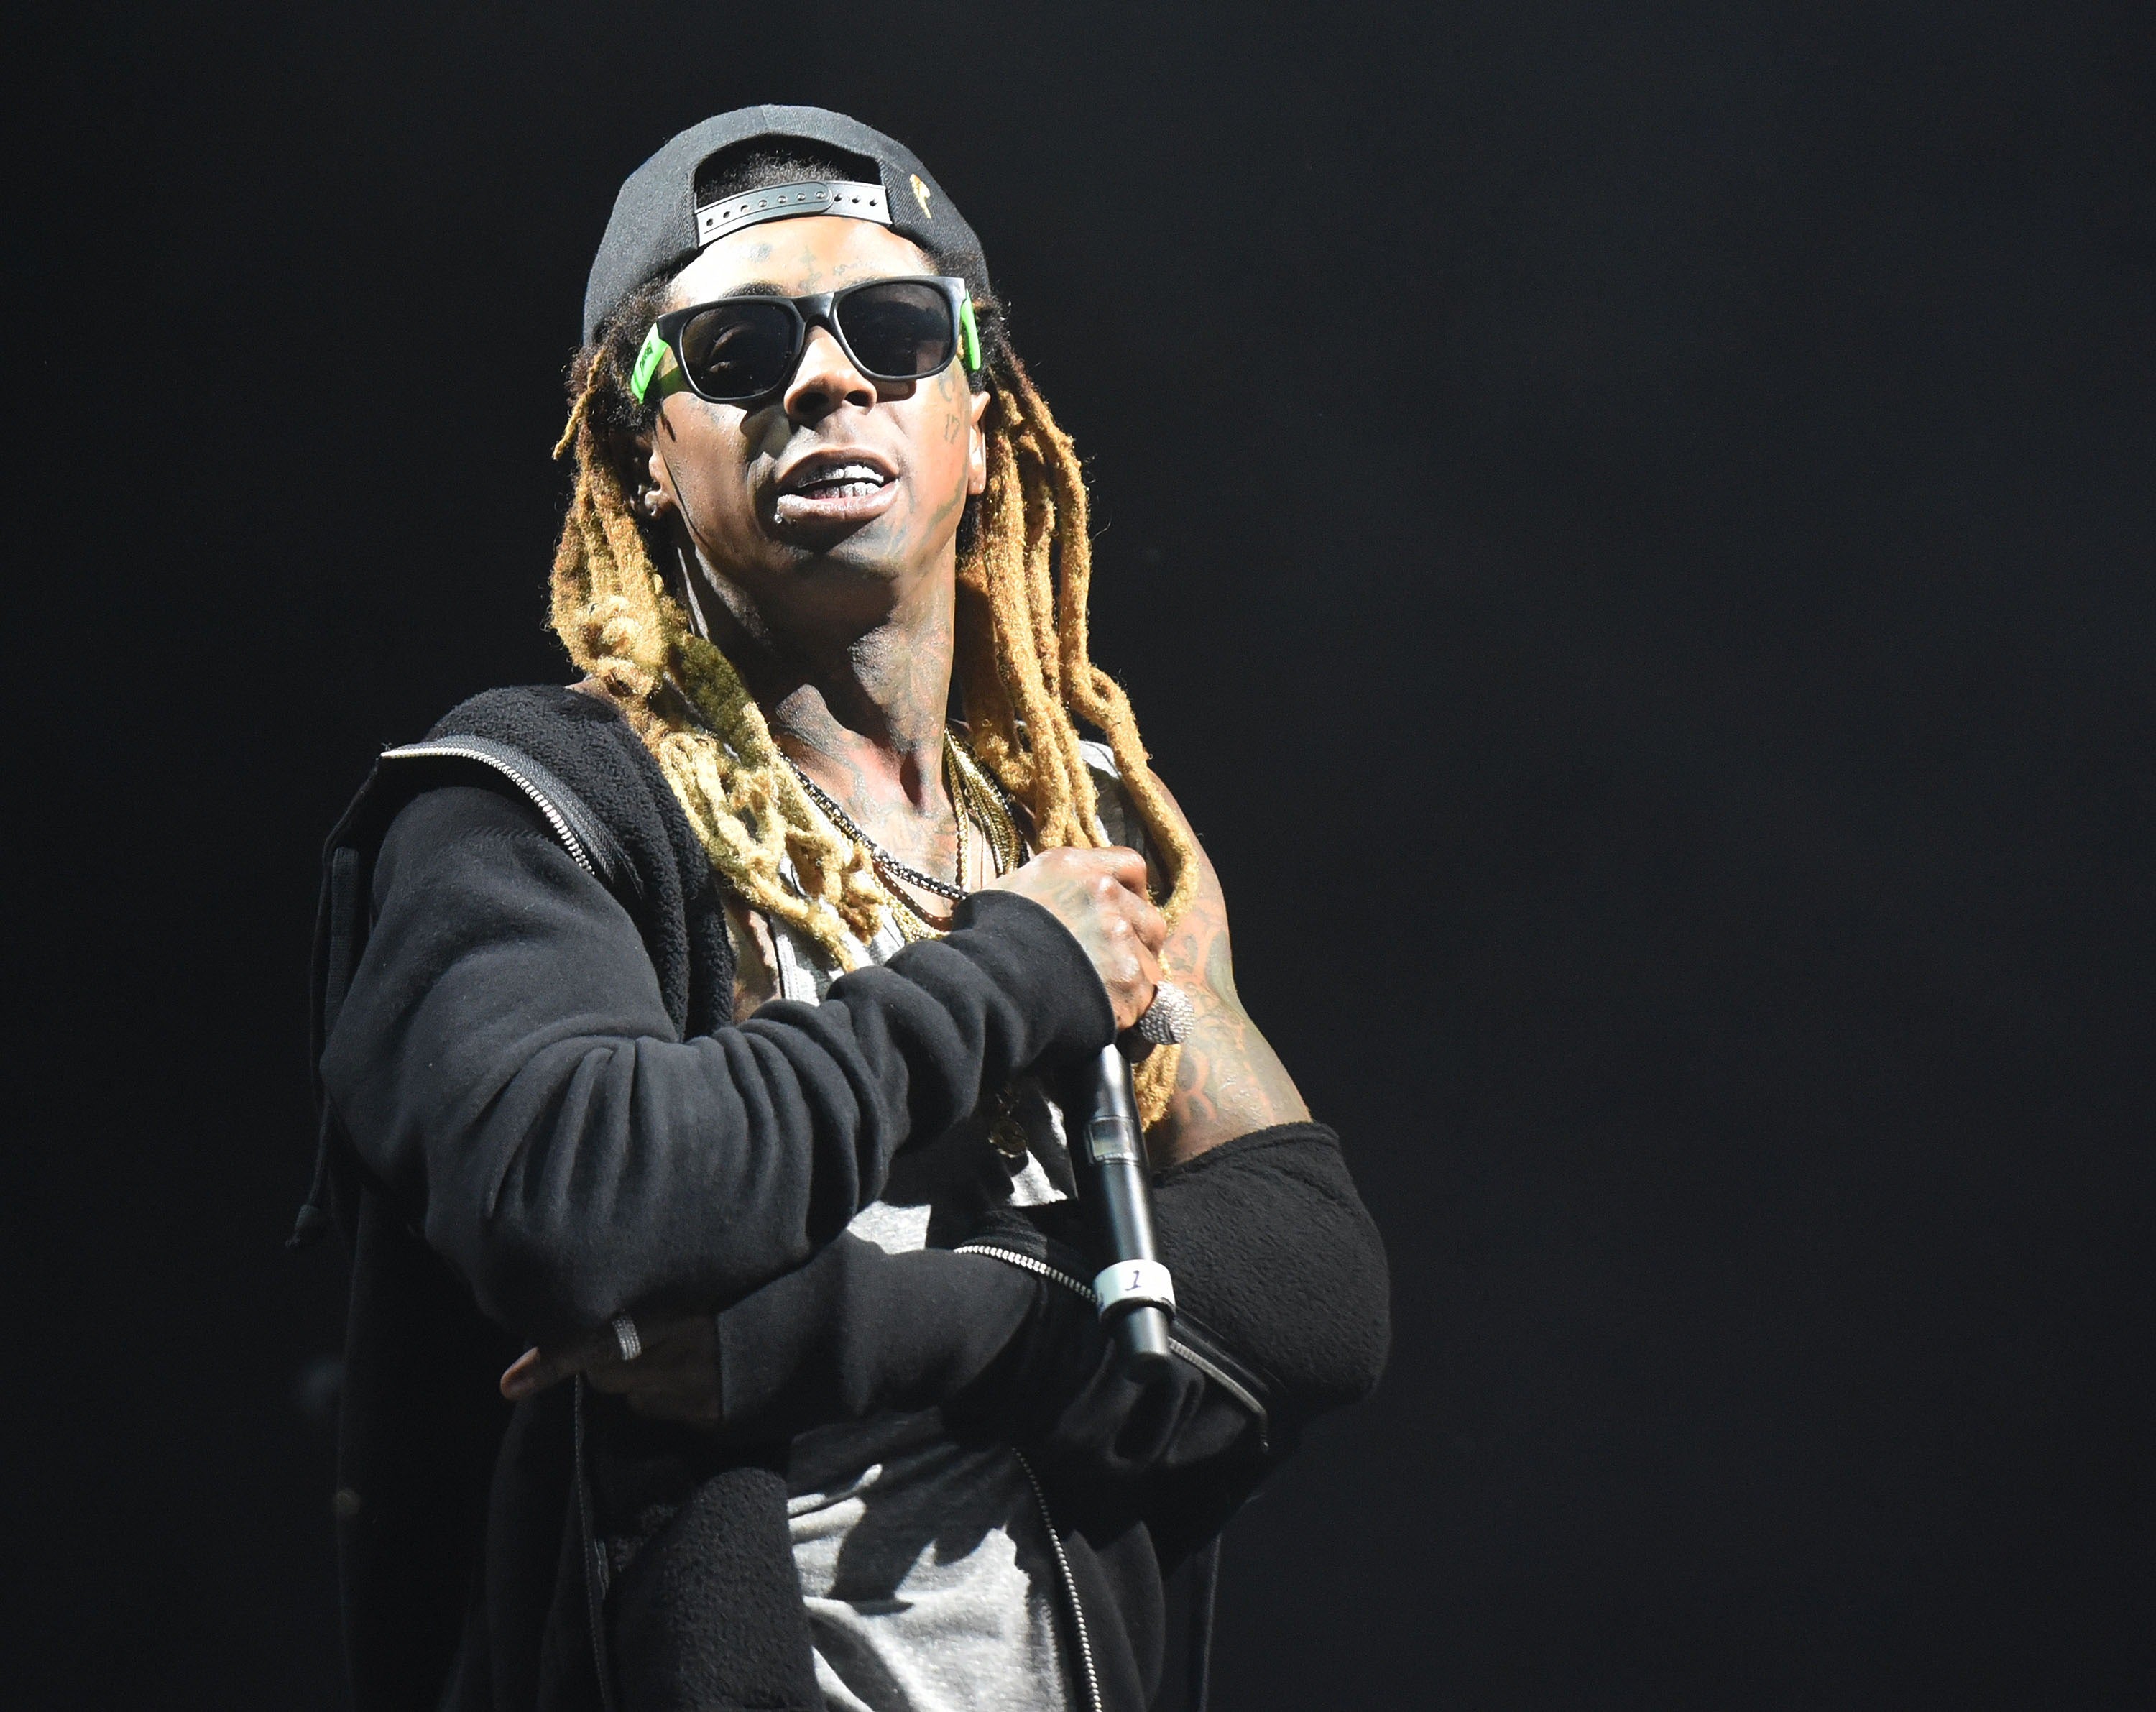 Lil Wayne Apologizes For Black Lives Matter Rant, But It's Too Late
